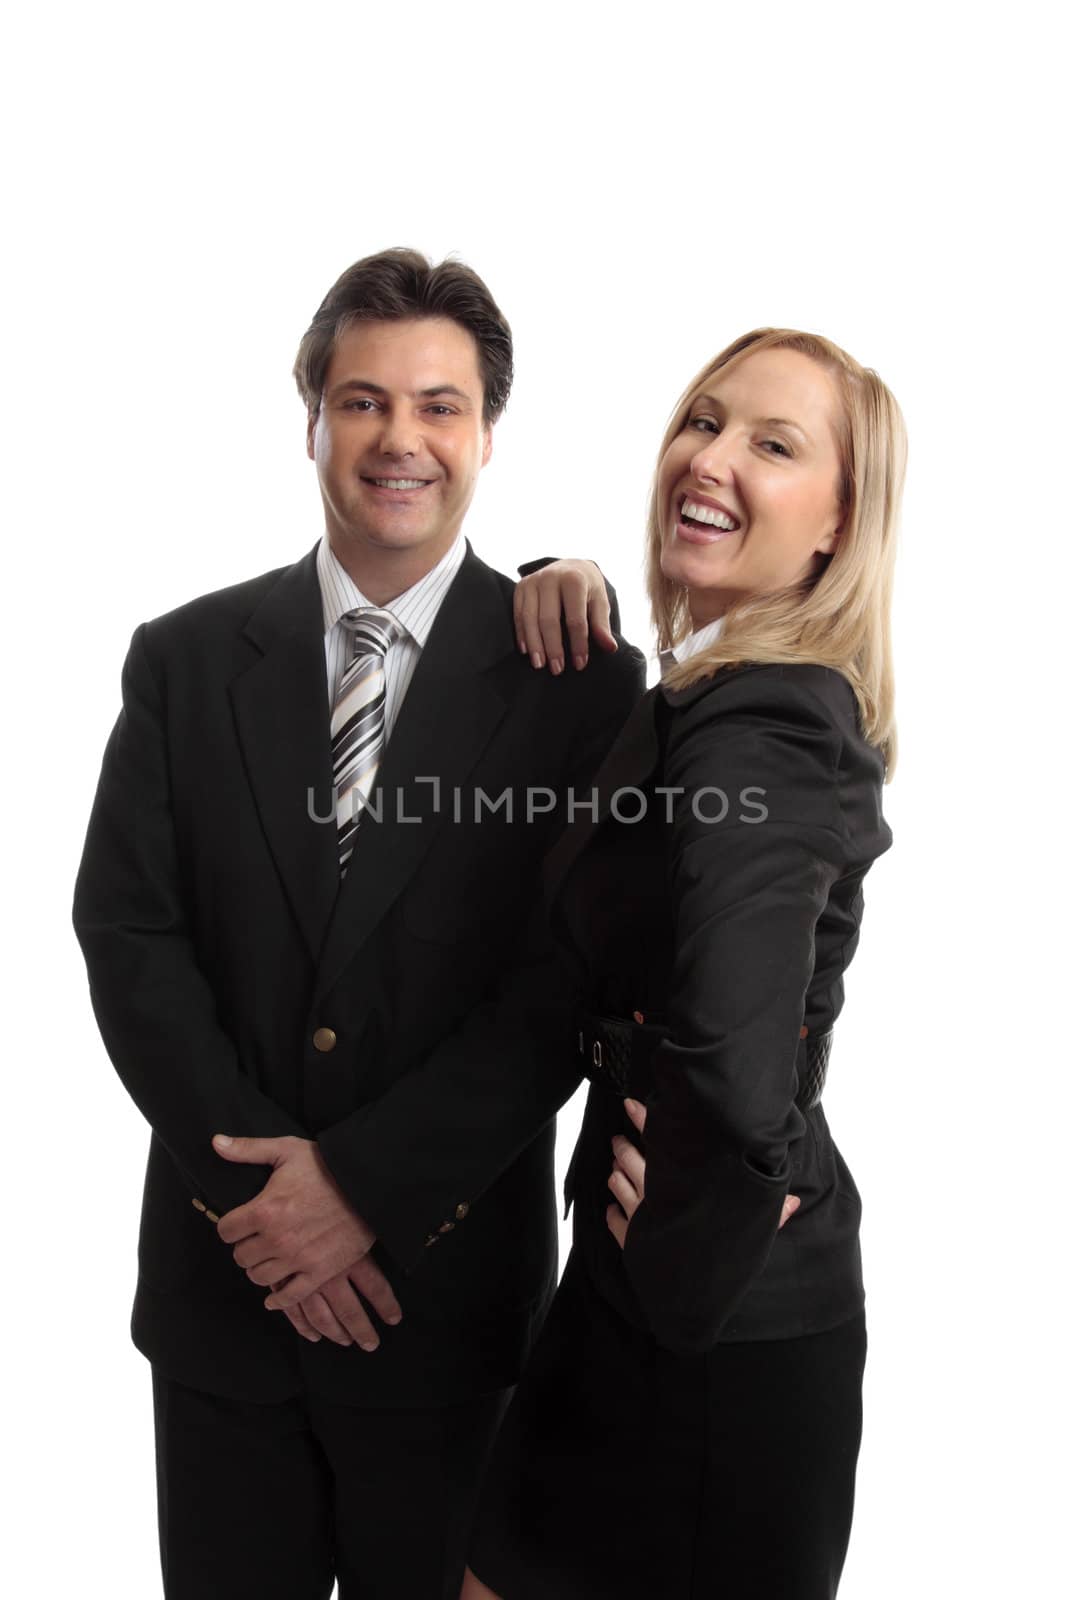 Successful  business partners, sales team or office colleagues confidently smiling or celebrate success or goal.  Could also be husband wife team.